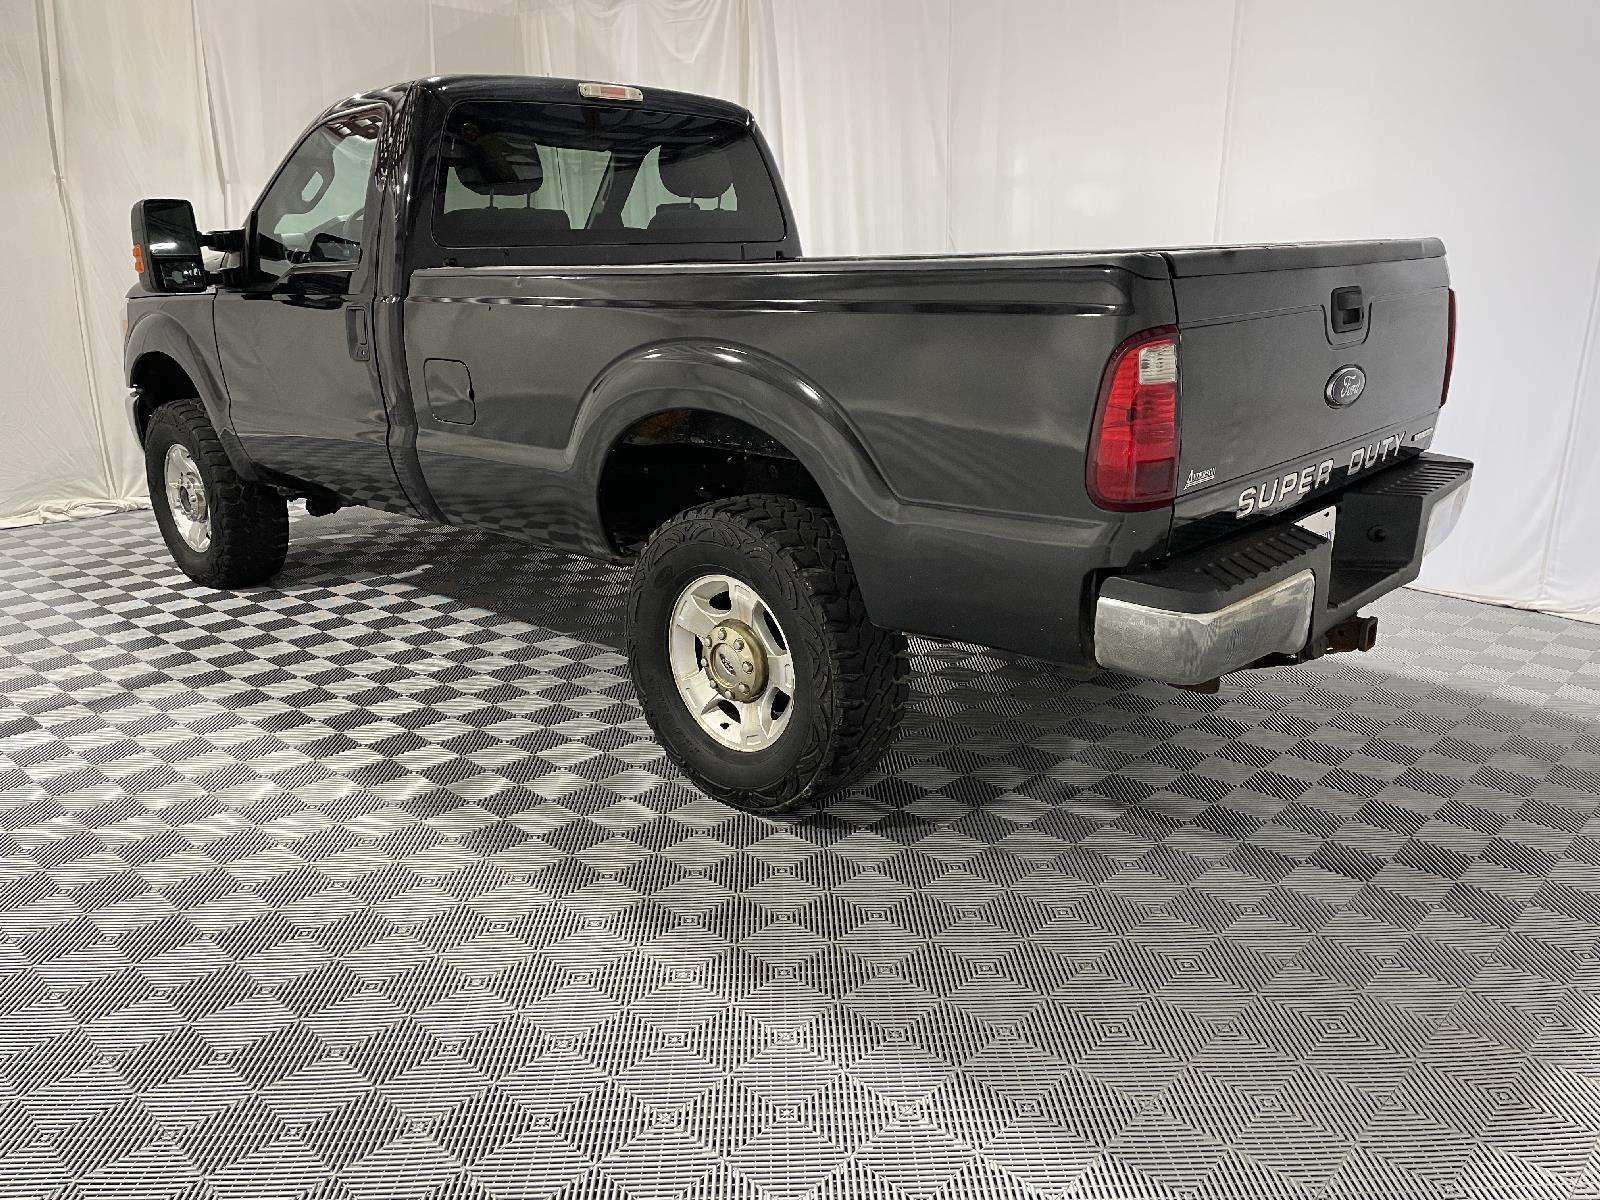 Used 2015 Ford Super Duty F-350 SRW XLT Regular Cab Truck for sale in St Joseph MO